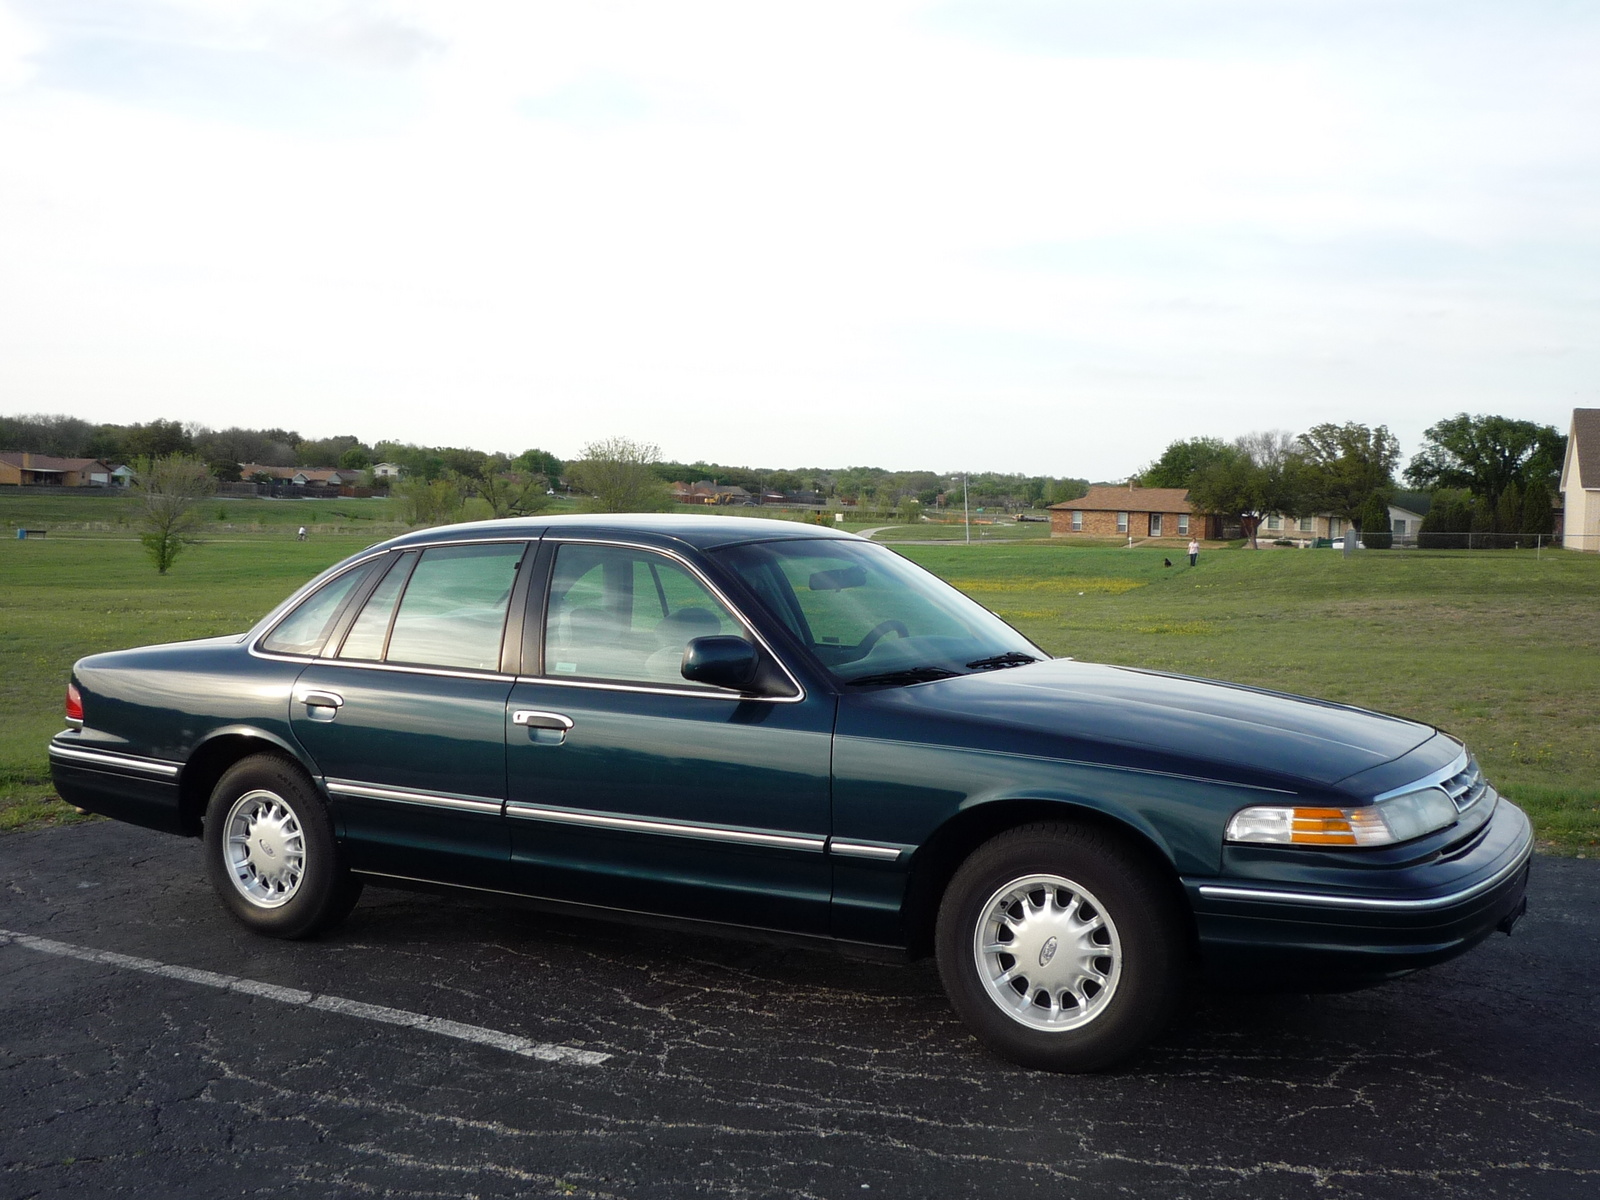 1996 Ford crown victoria lx reviews #8